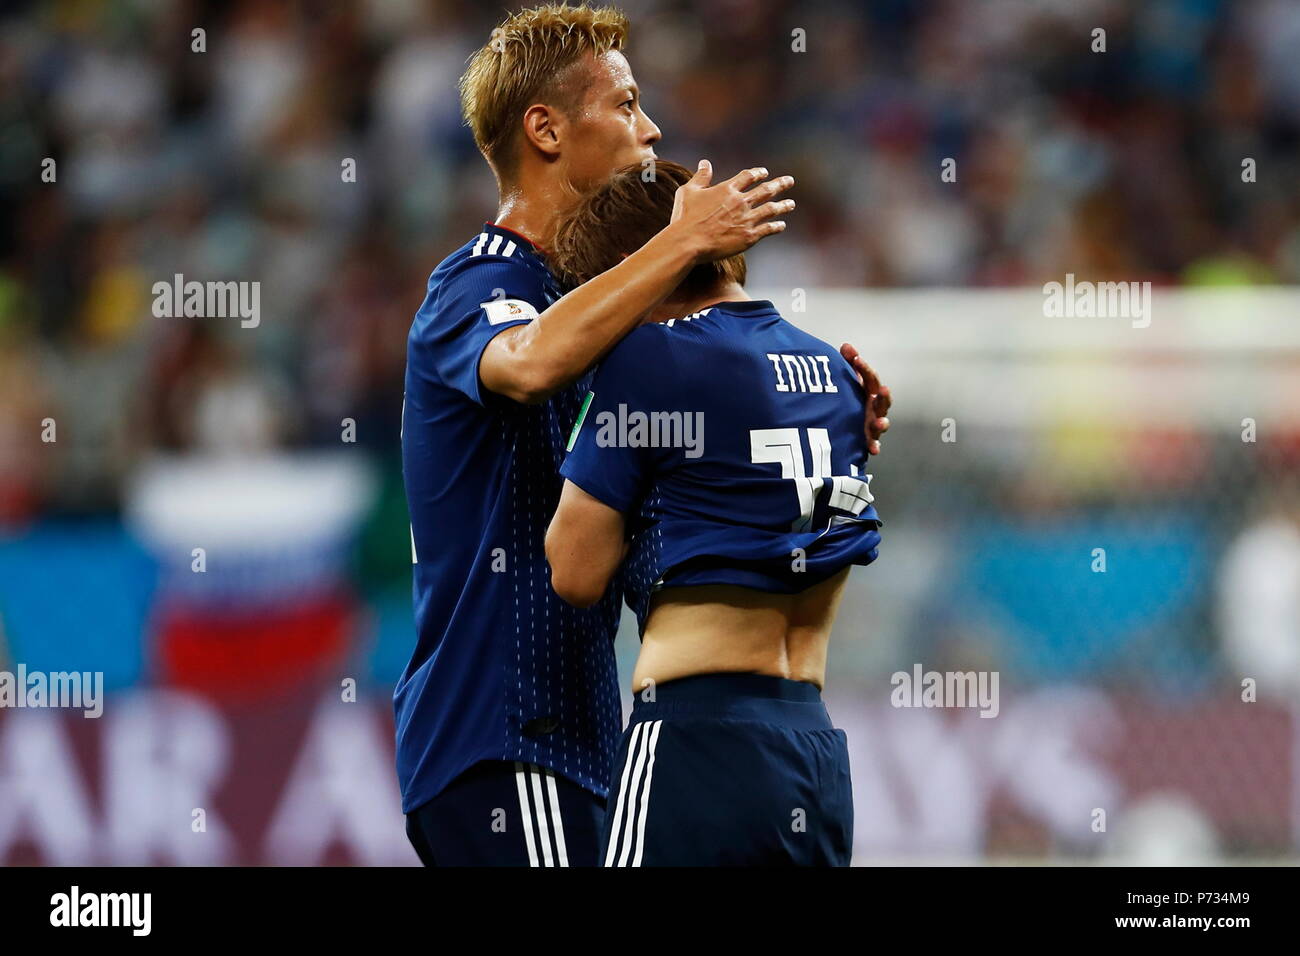 Rostov On Don, Russia. 2nd July, 2018. (L-R) Keisuke Honda, Takashi Inui (JPN) Football/Soccer : Honda and Inui dejected after loosing FIFA World Cup Russia 2018 match between Belgium 3-2 Japan at the Rostov Arena in Rostov On Don, Russia . Credit: Mutsu KAWAMORI/AFLO/Alamy Live News Stock Photo